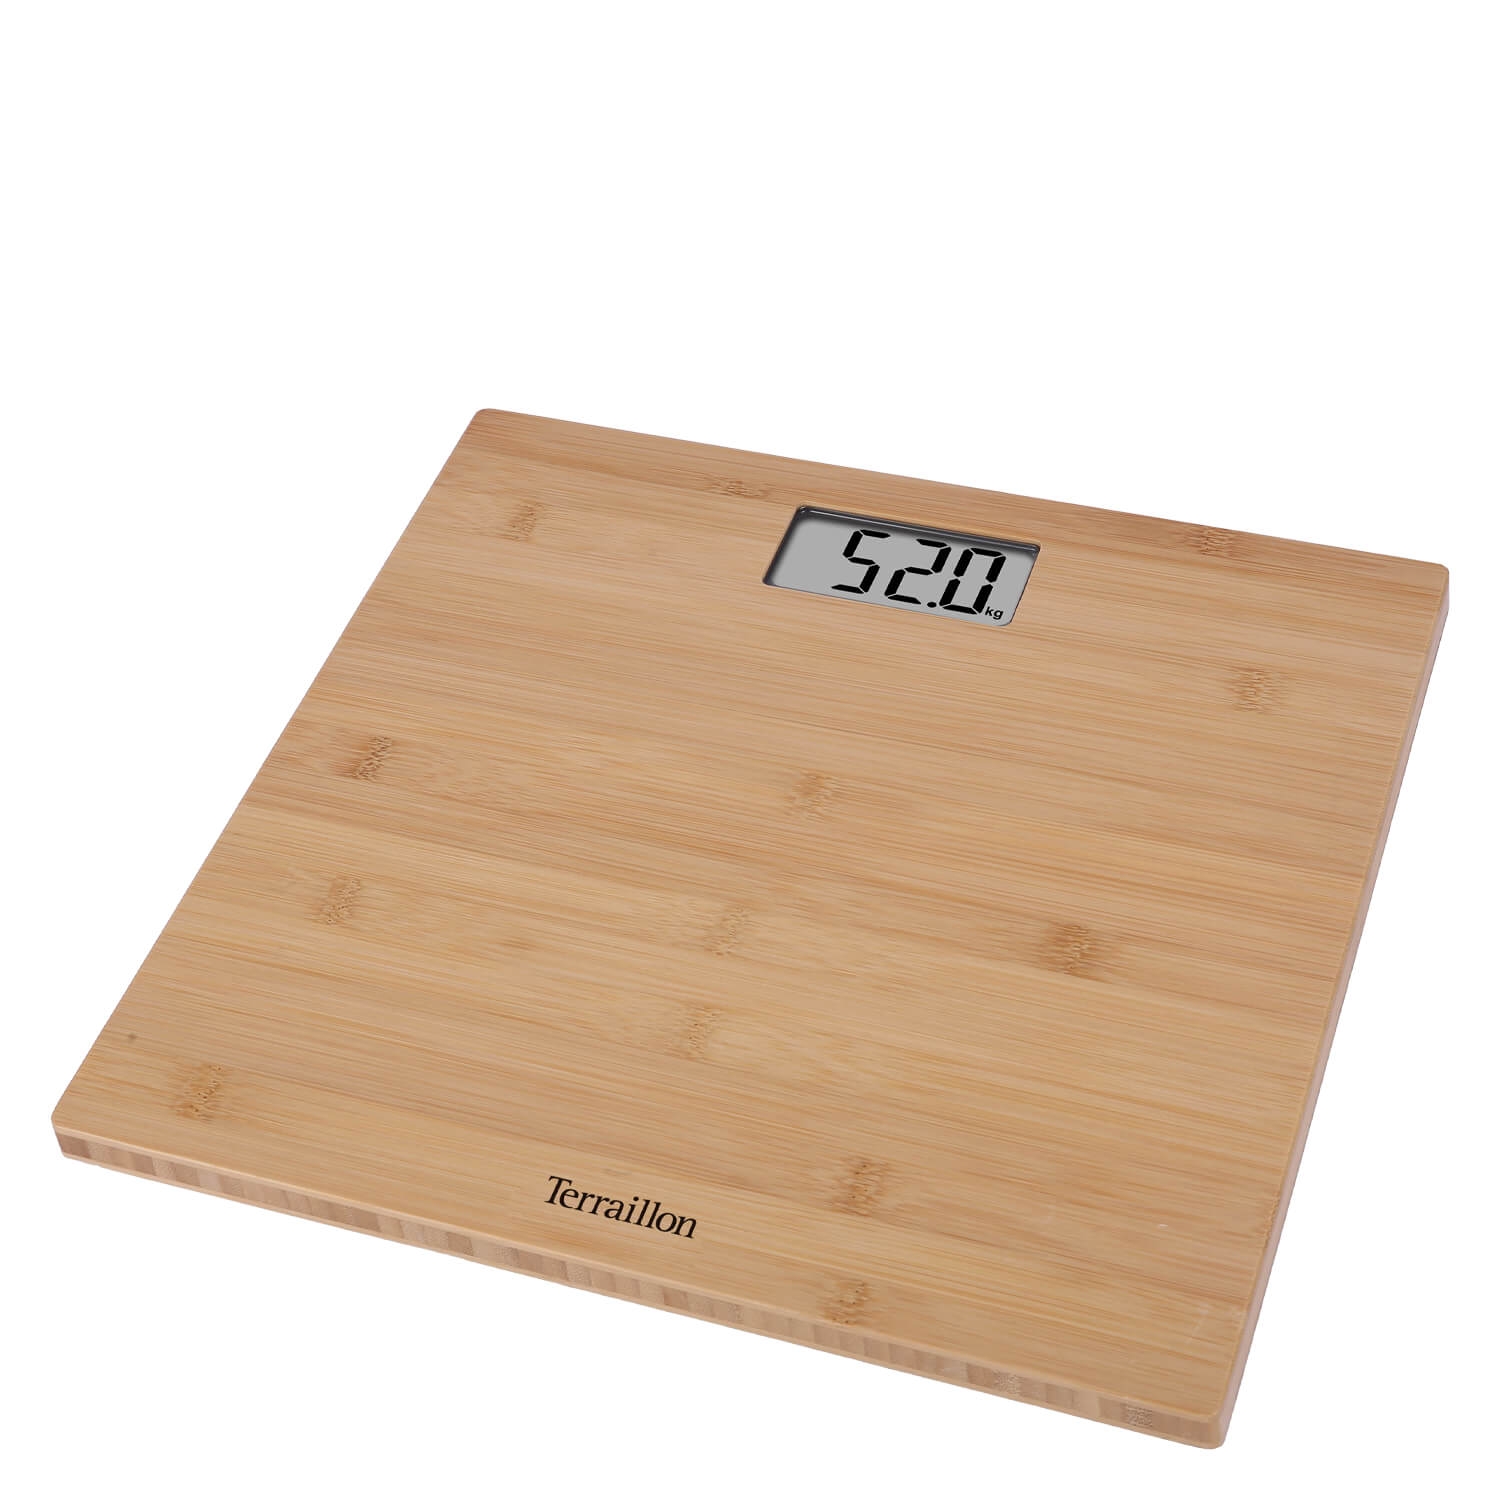 Product image from Terraillon - Bamboo Personenwaage